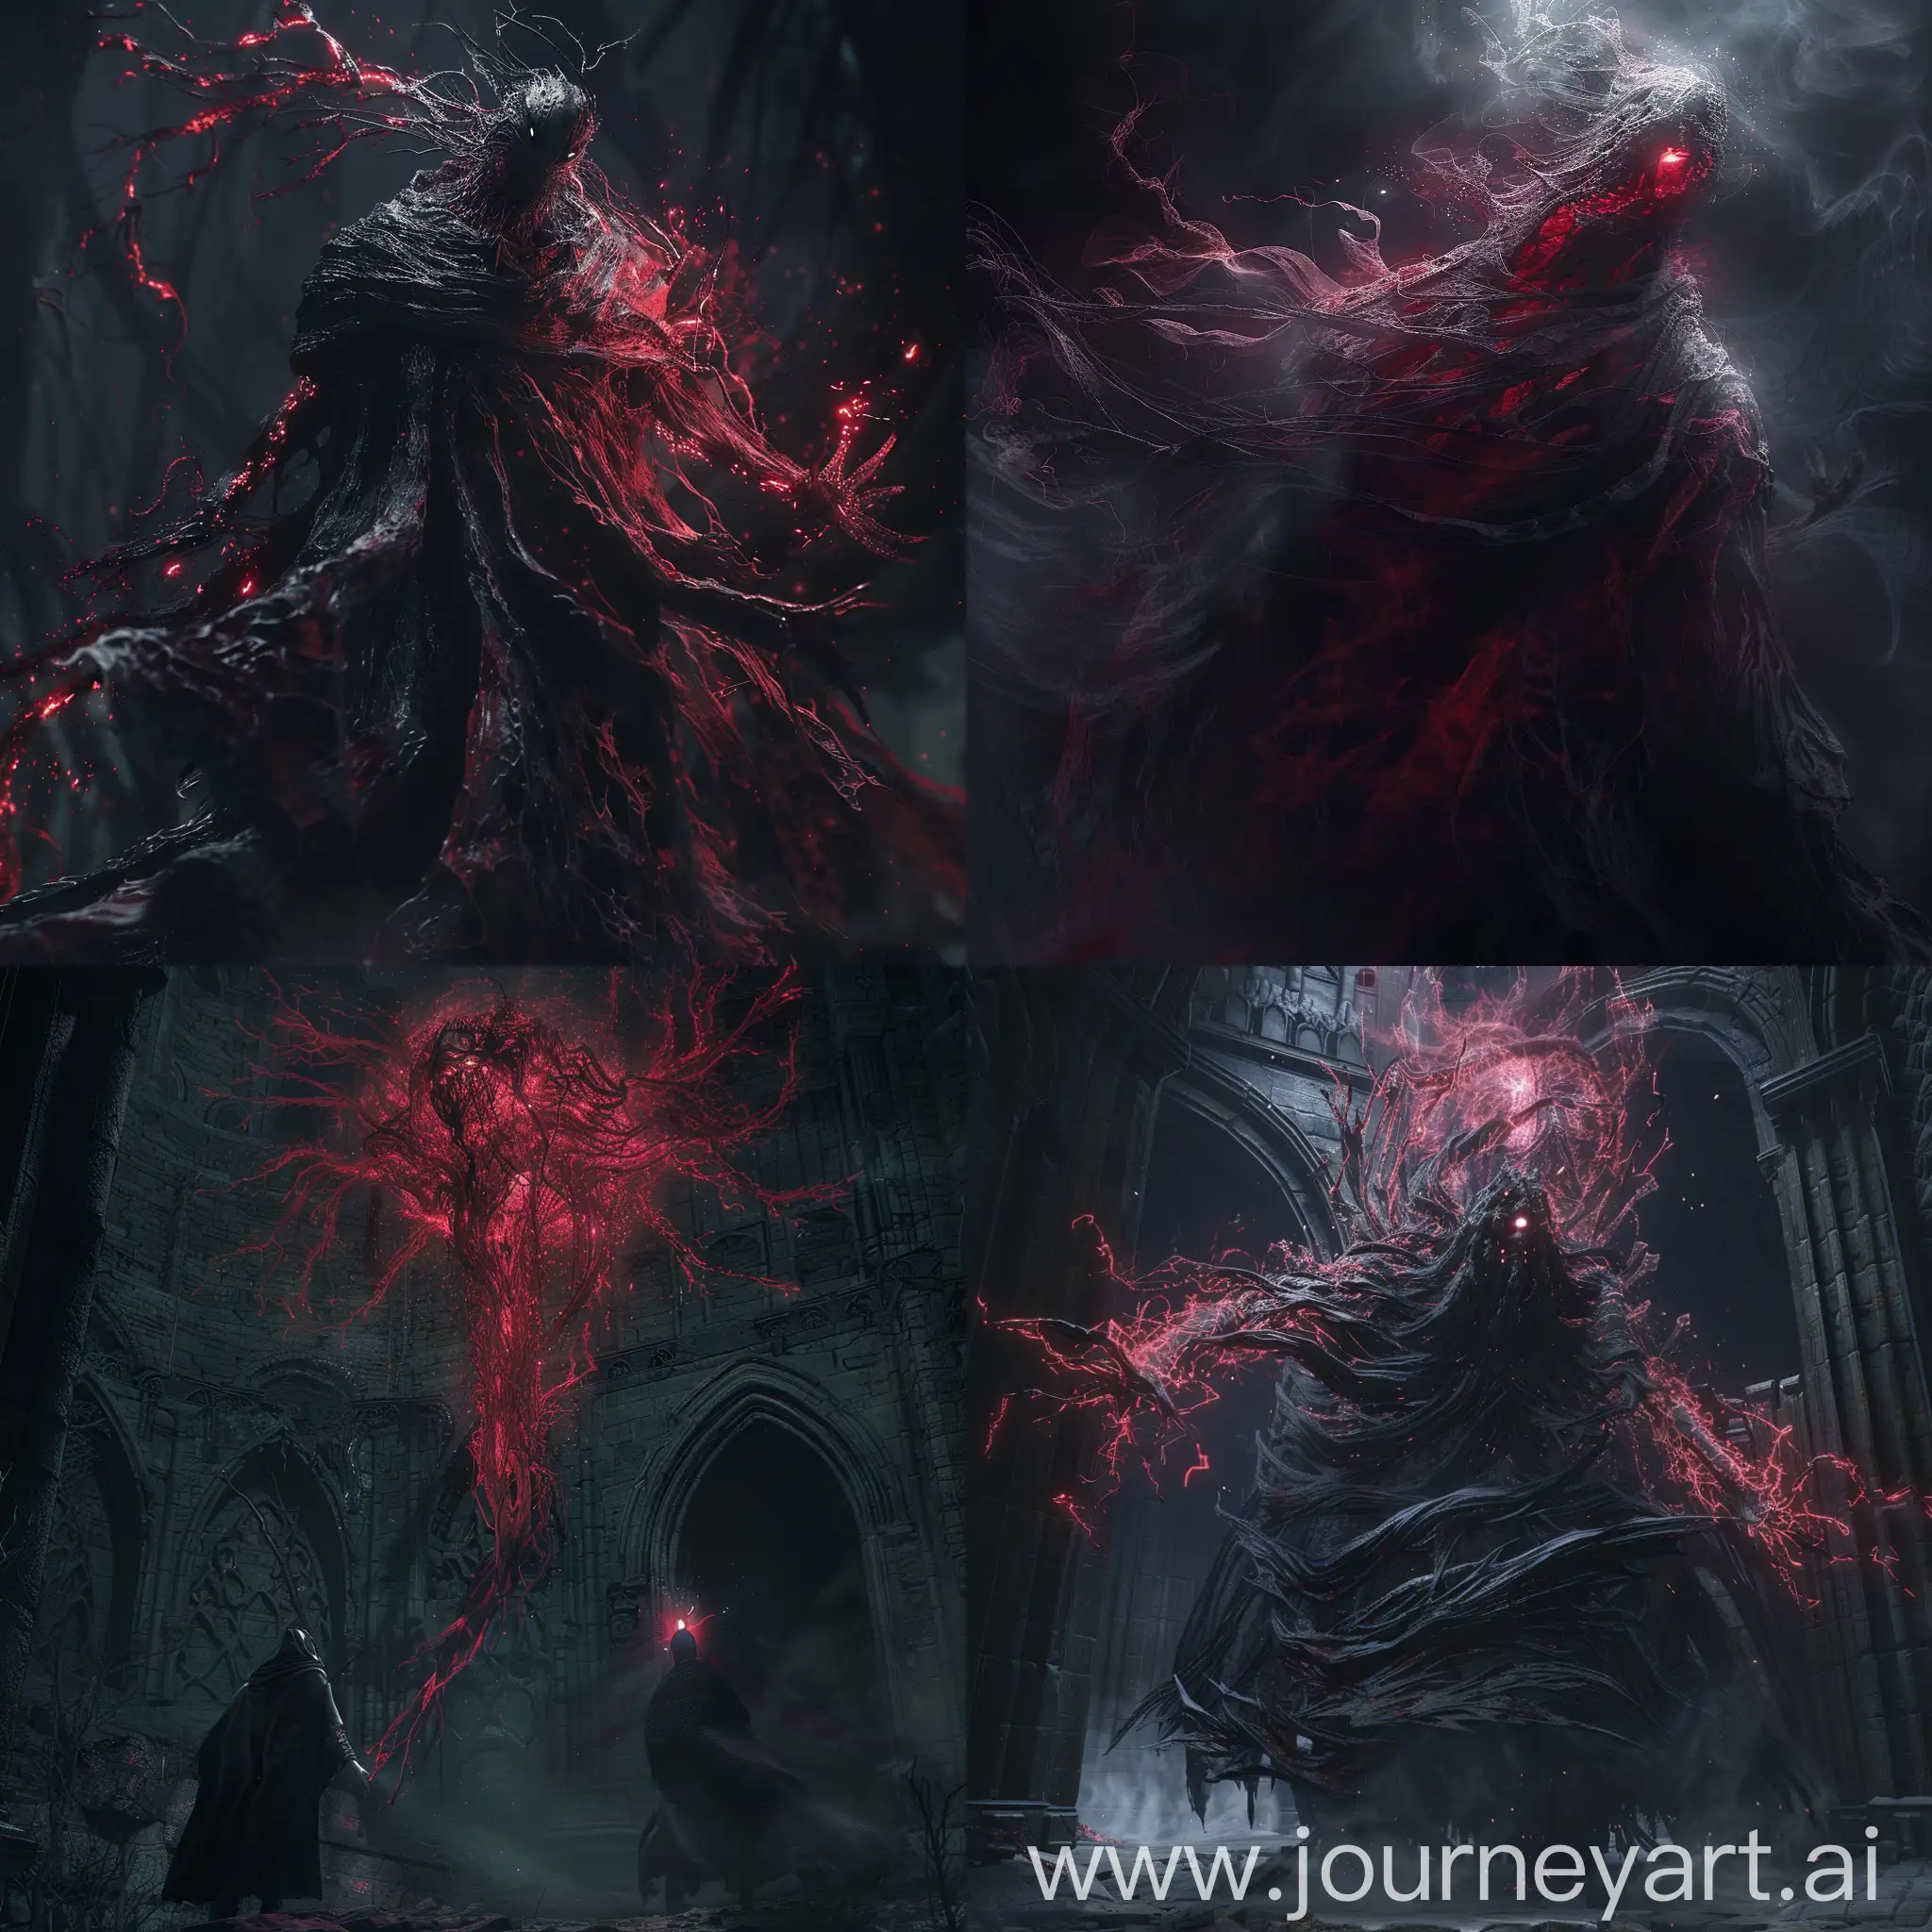 В the depths of Elden Ring, a demonic gaze pierces through the darkness, shrouded in a grotesque aura. A dark fantasy essence permeates its being, giving the form a mystical flicker of crimson glow. This boss, rendered in high resolution 8K, stands as an embodiment of shadows, its intimidating figure unfolding in mysterious obscurity, while the sinister presence is ominously illuminated by a crimson light.